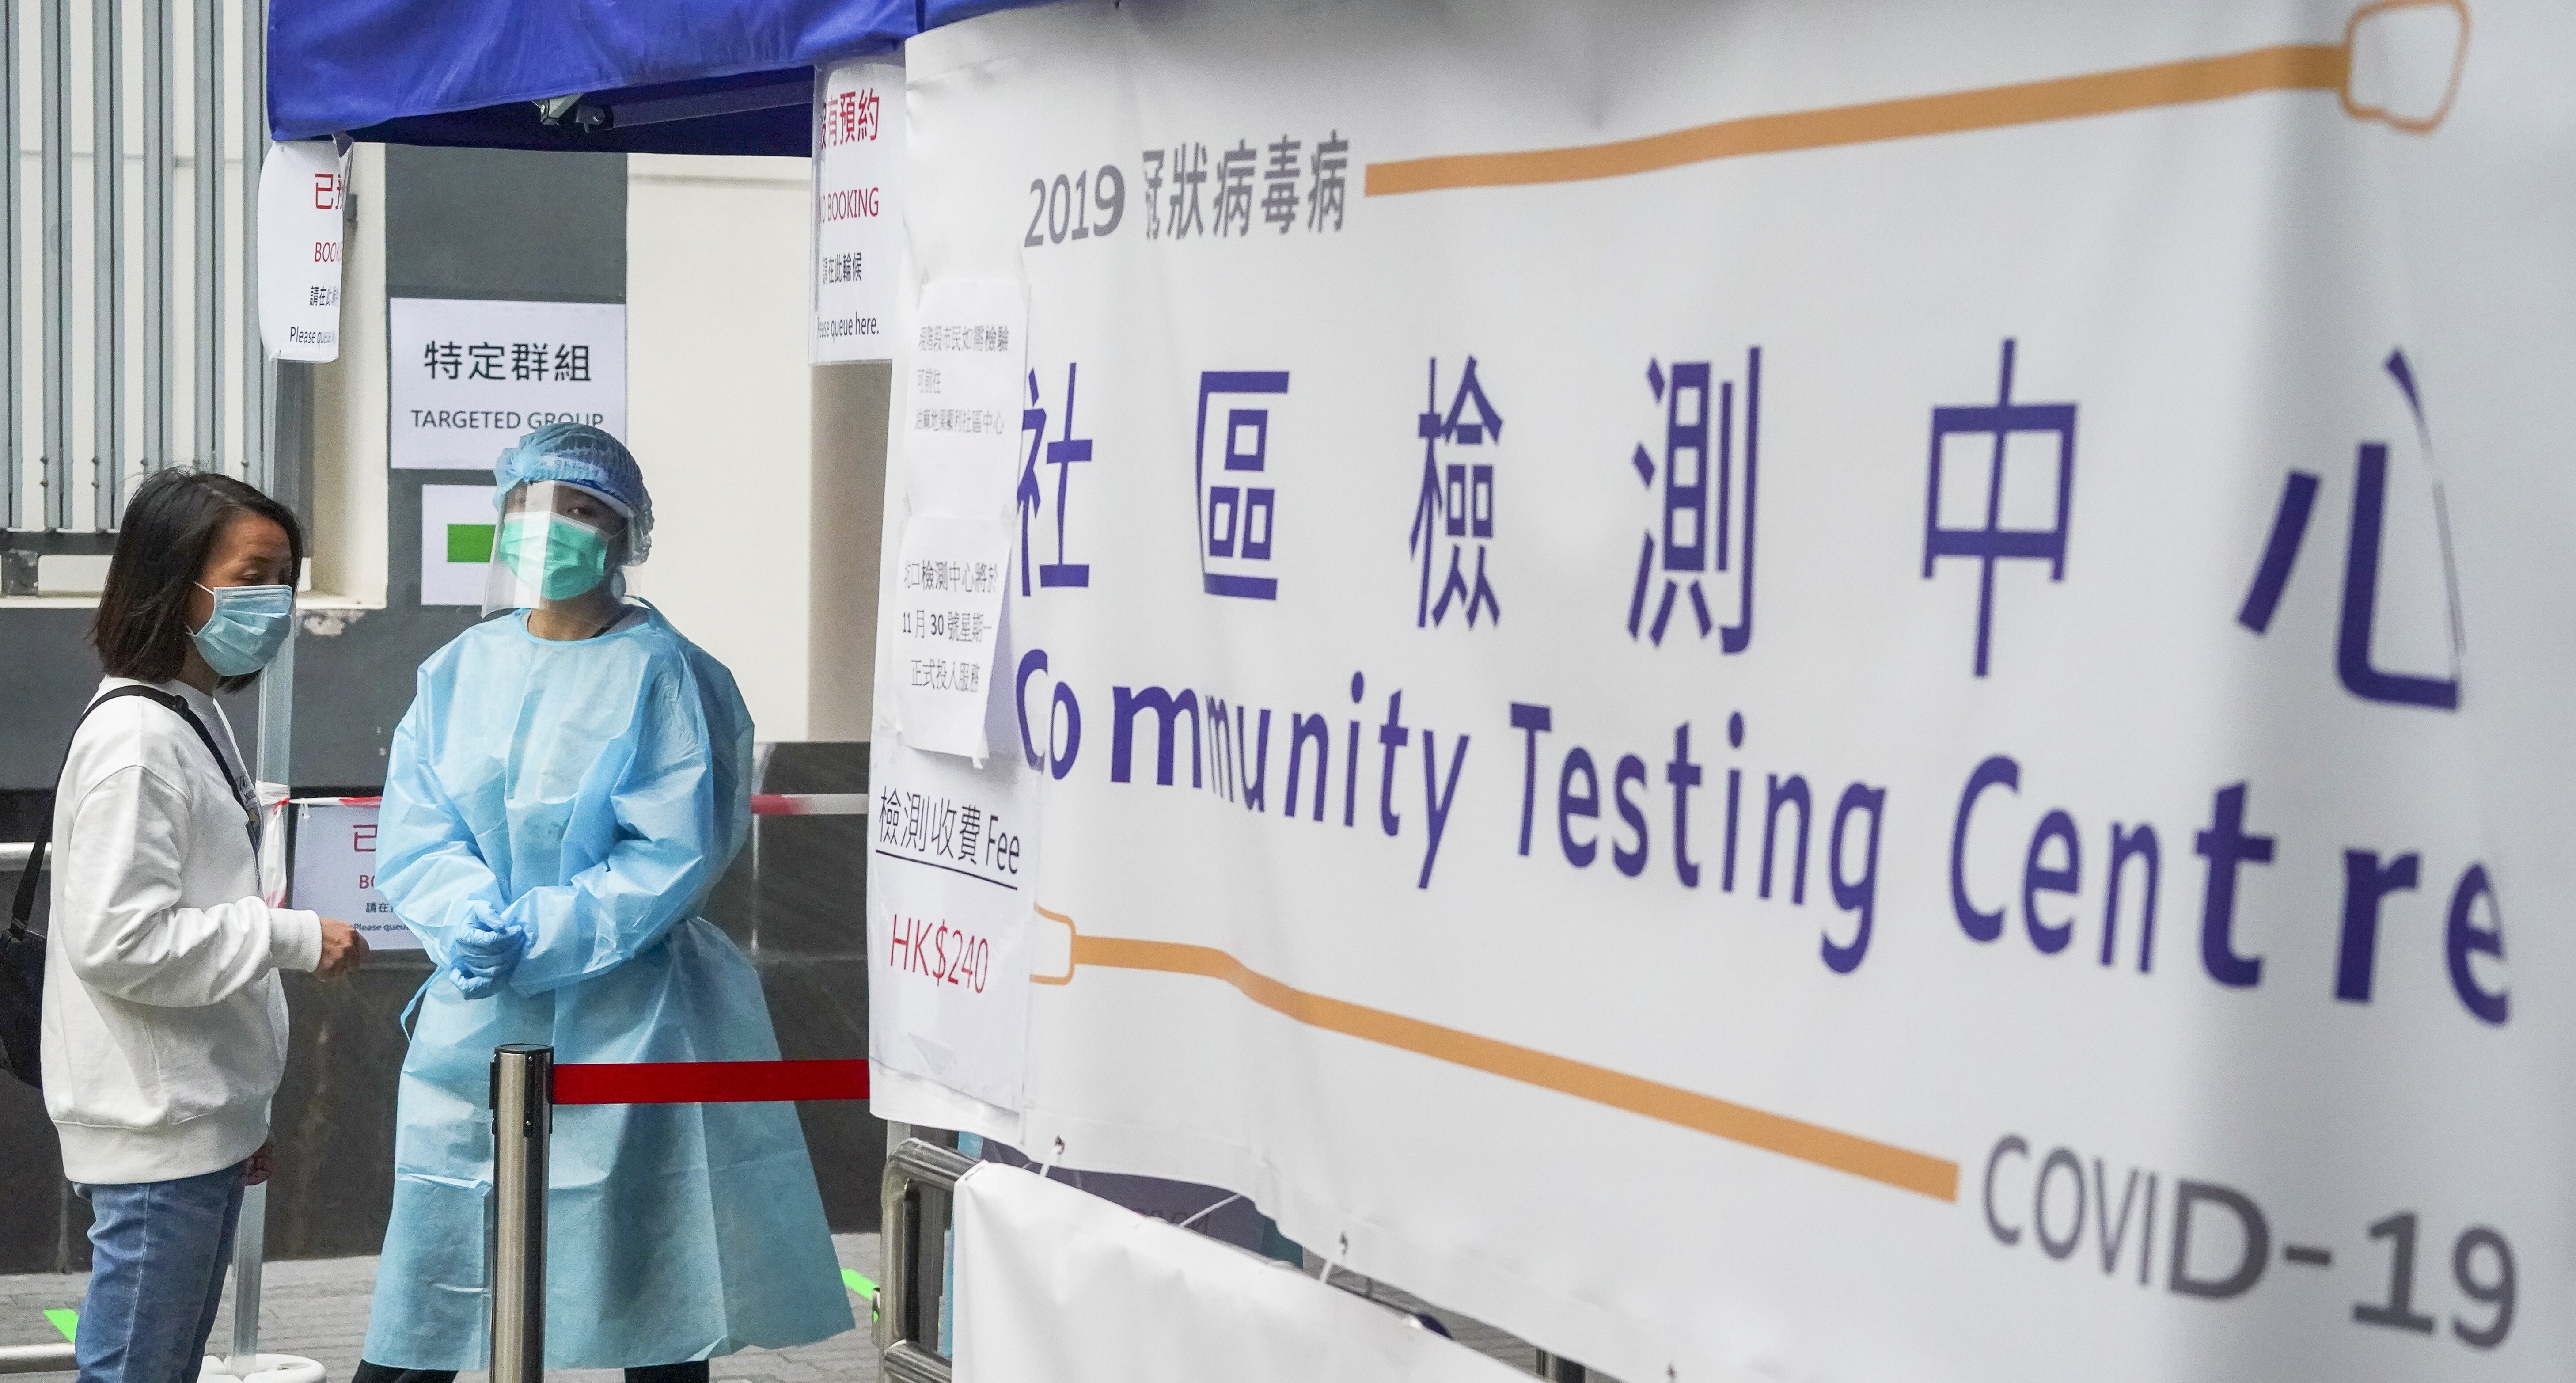 Slots for voluntary coronavirus testing have been filling up fast. Photo: Felix Wong